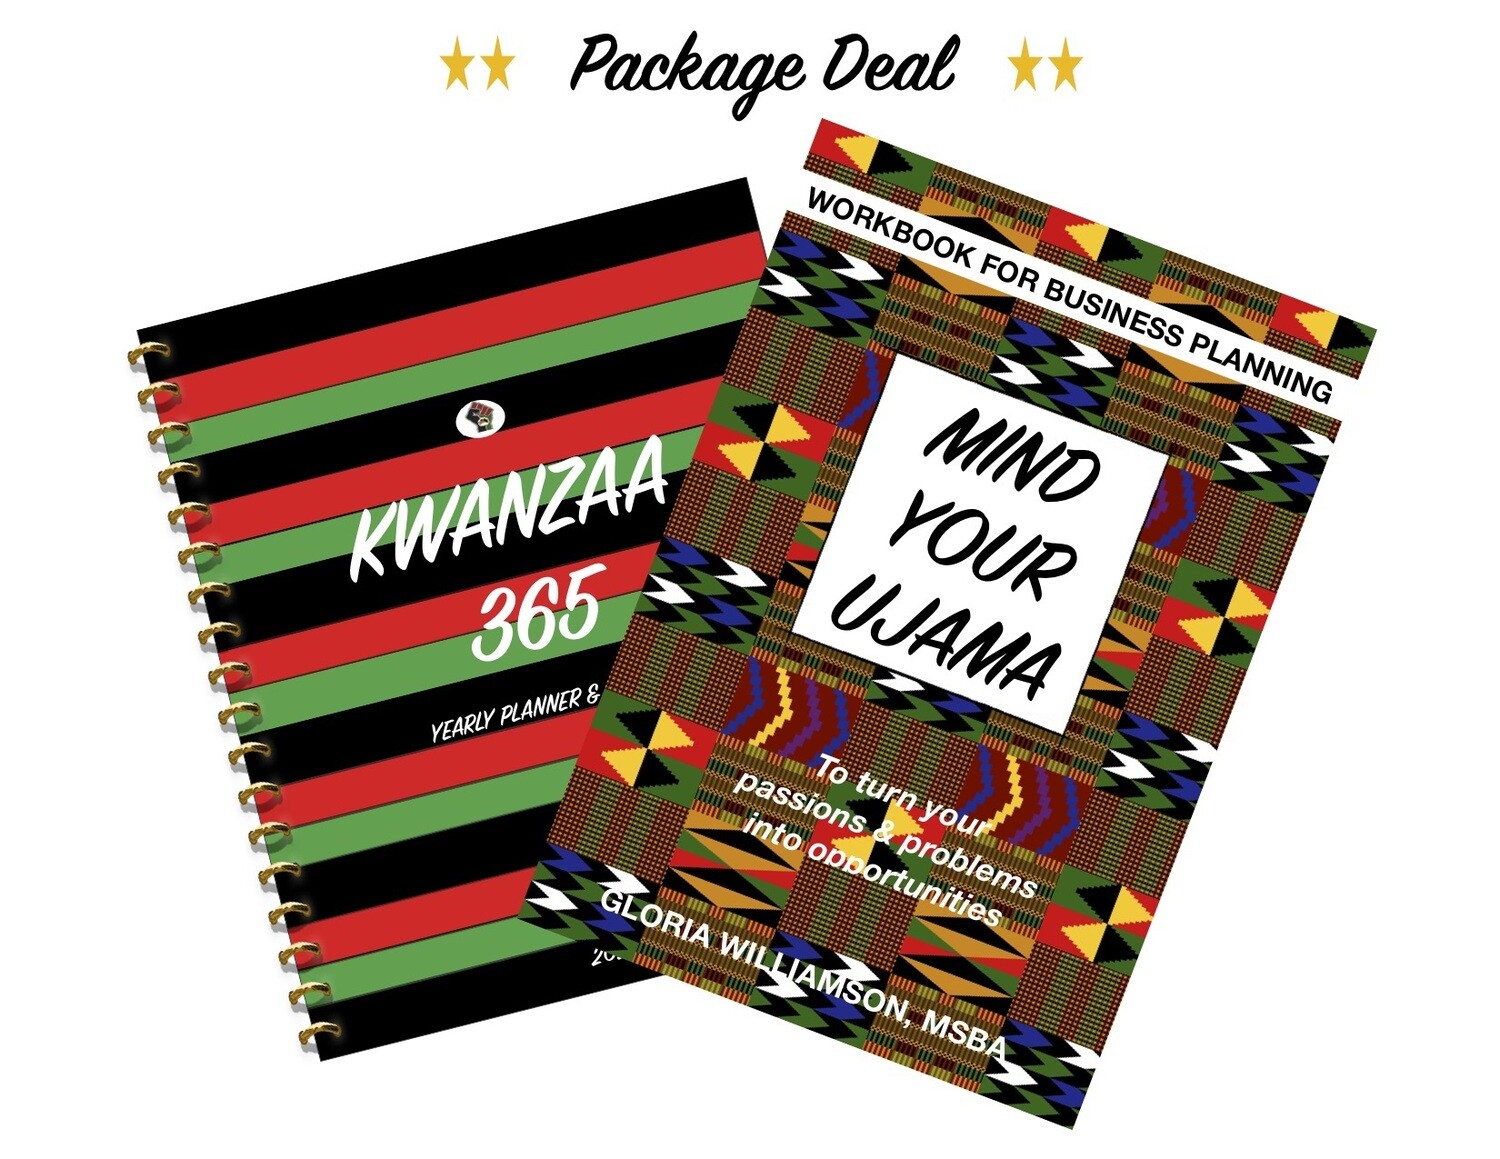 2 FOR 1-Kwanzaa 365 Yearly Planner & Agenda 2020 & MIND YOUR UJAMAA: Workbook for Business Planning